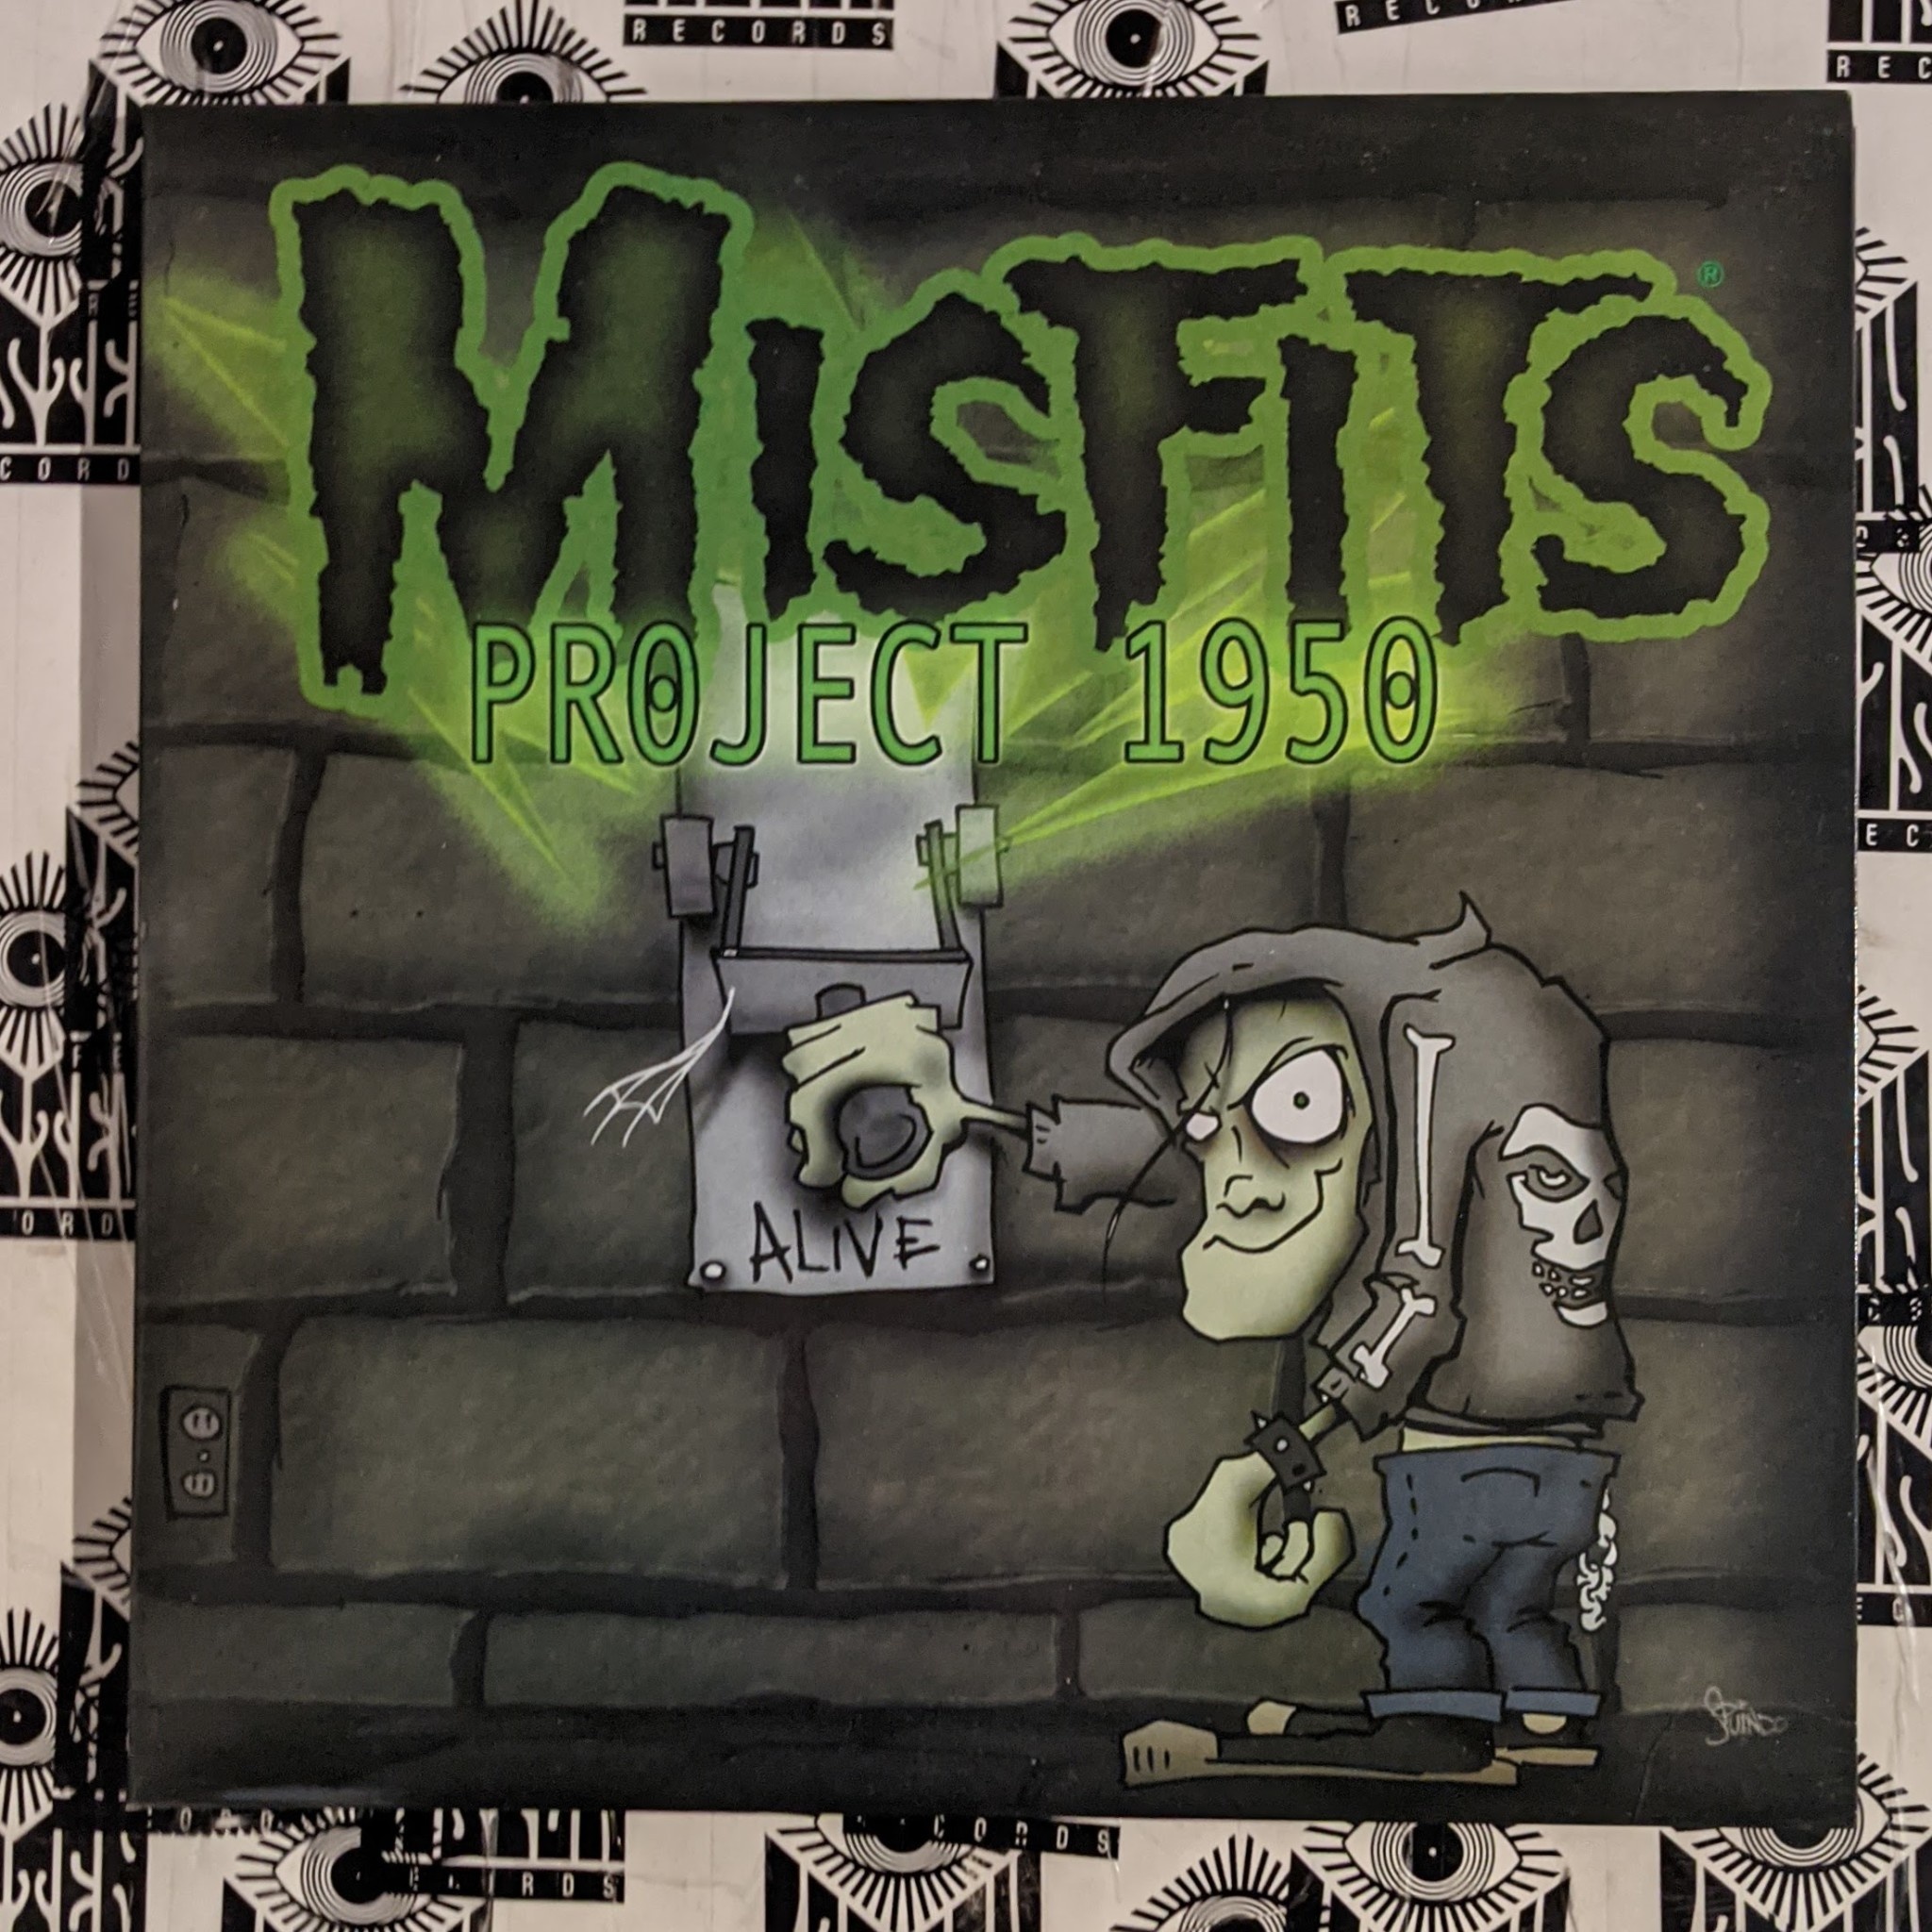 USED: Misfits: Project 1950 LP - Listen Records